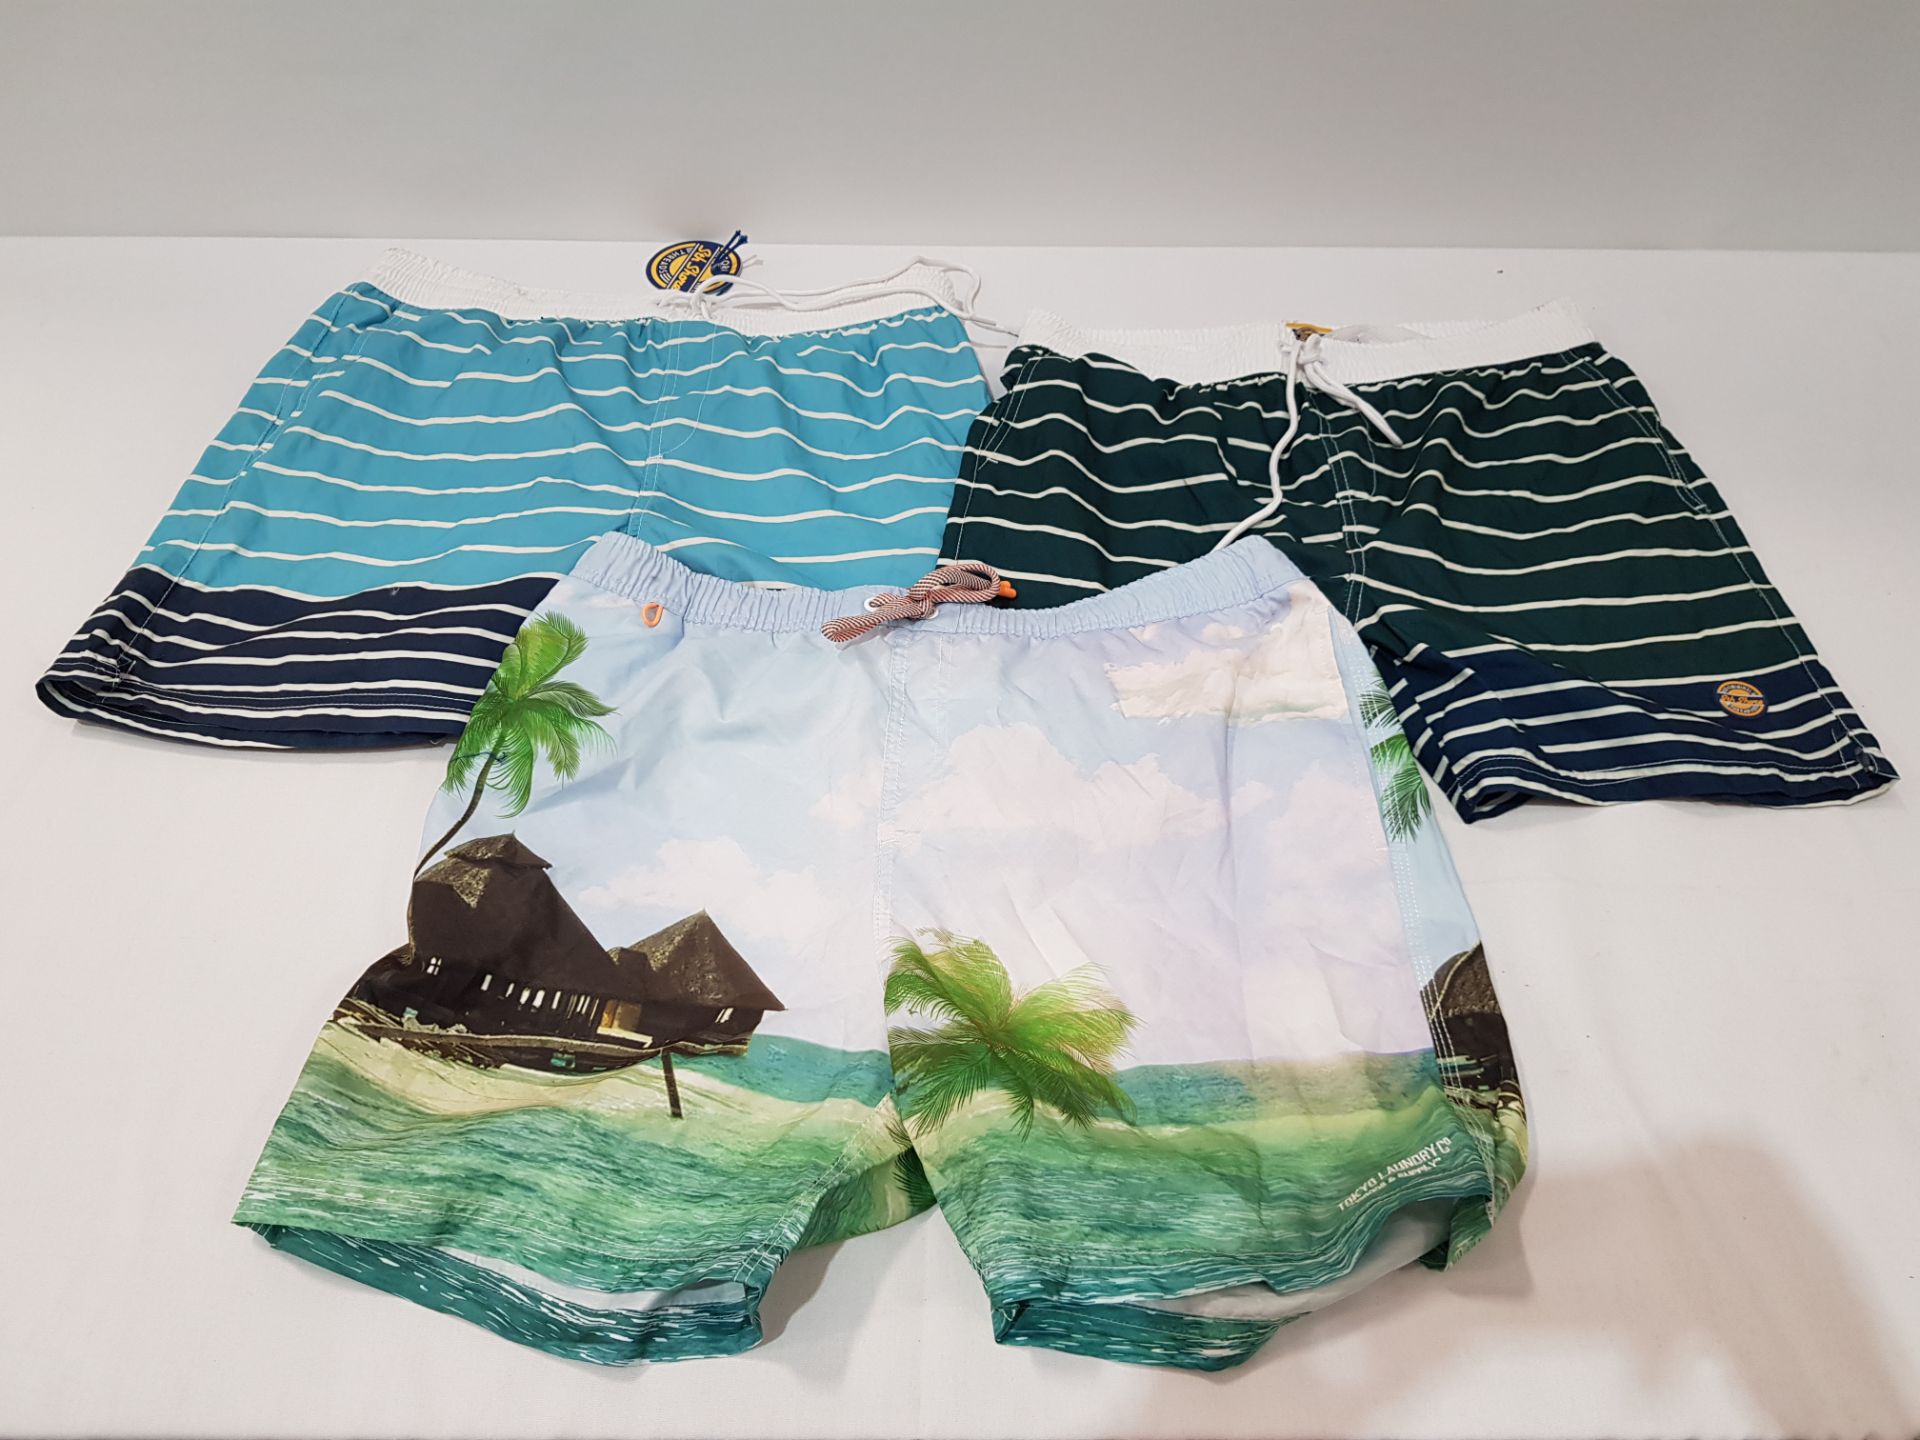 28 X BRAND NEW MIXED LOT CONTAINING 11 MIXED TOKYO LAUNDRY ANS SOUTH SHORE SHORTS IN MIXED DESIGN